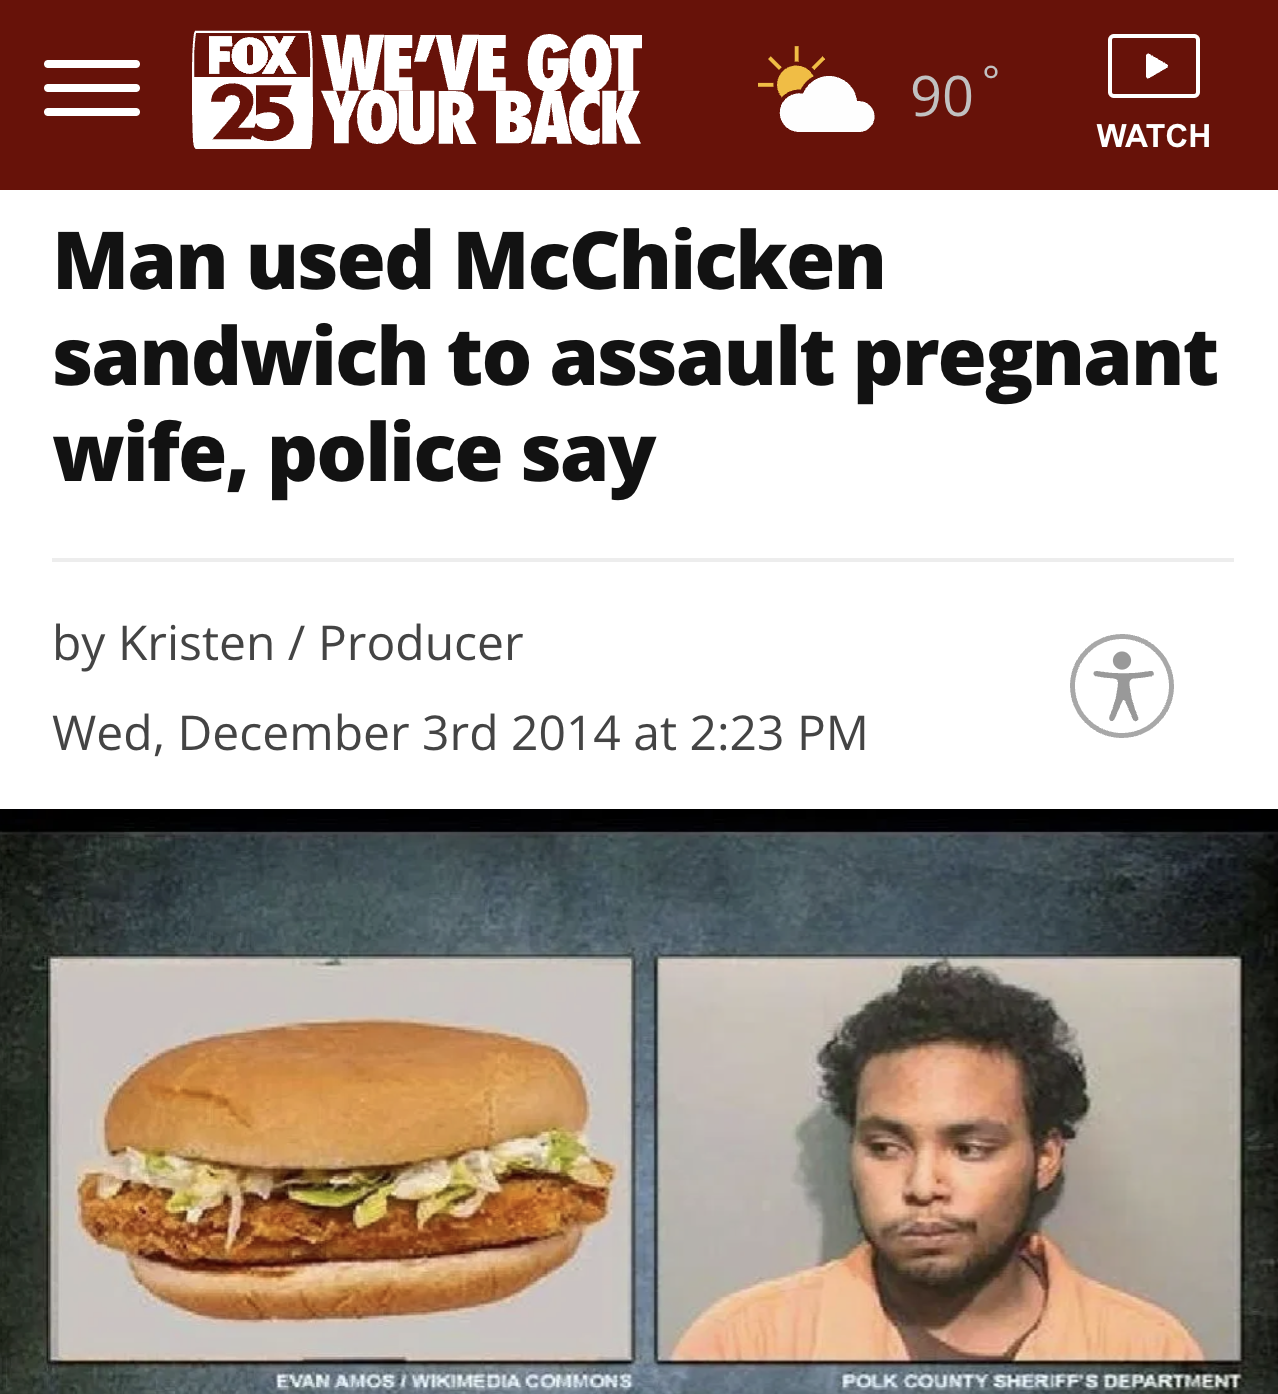 bun - Fox We'Ve Got 25 Your Back 90 Watch Man used McChicken sandwich to assault pregnant wife, police say by Kristen Producer Wed, December 3rd 2014 at Evan Amcb Wmedia Commons Folk County Sheriff'S Department